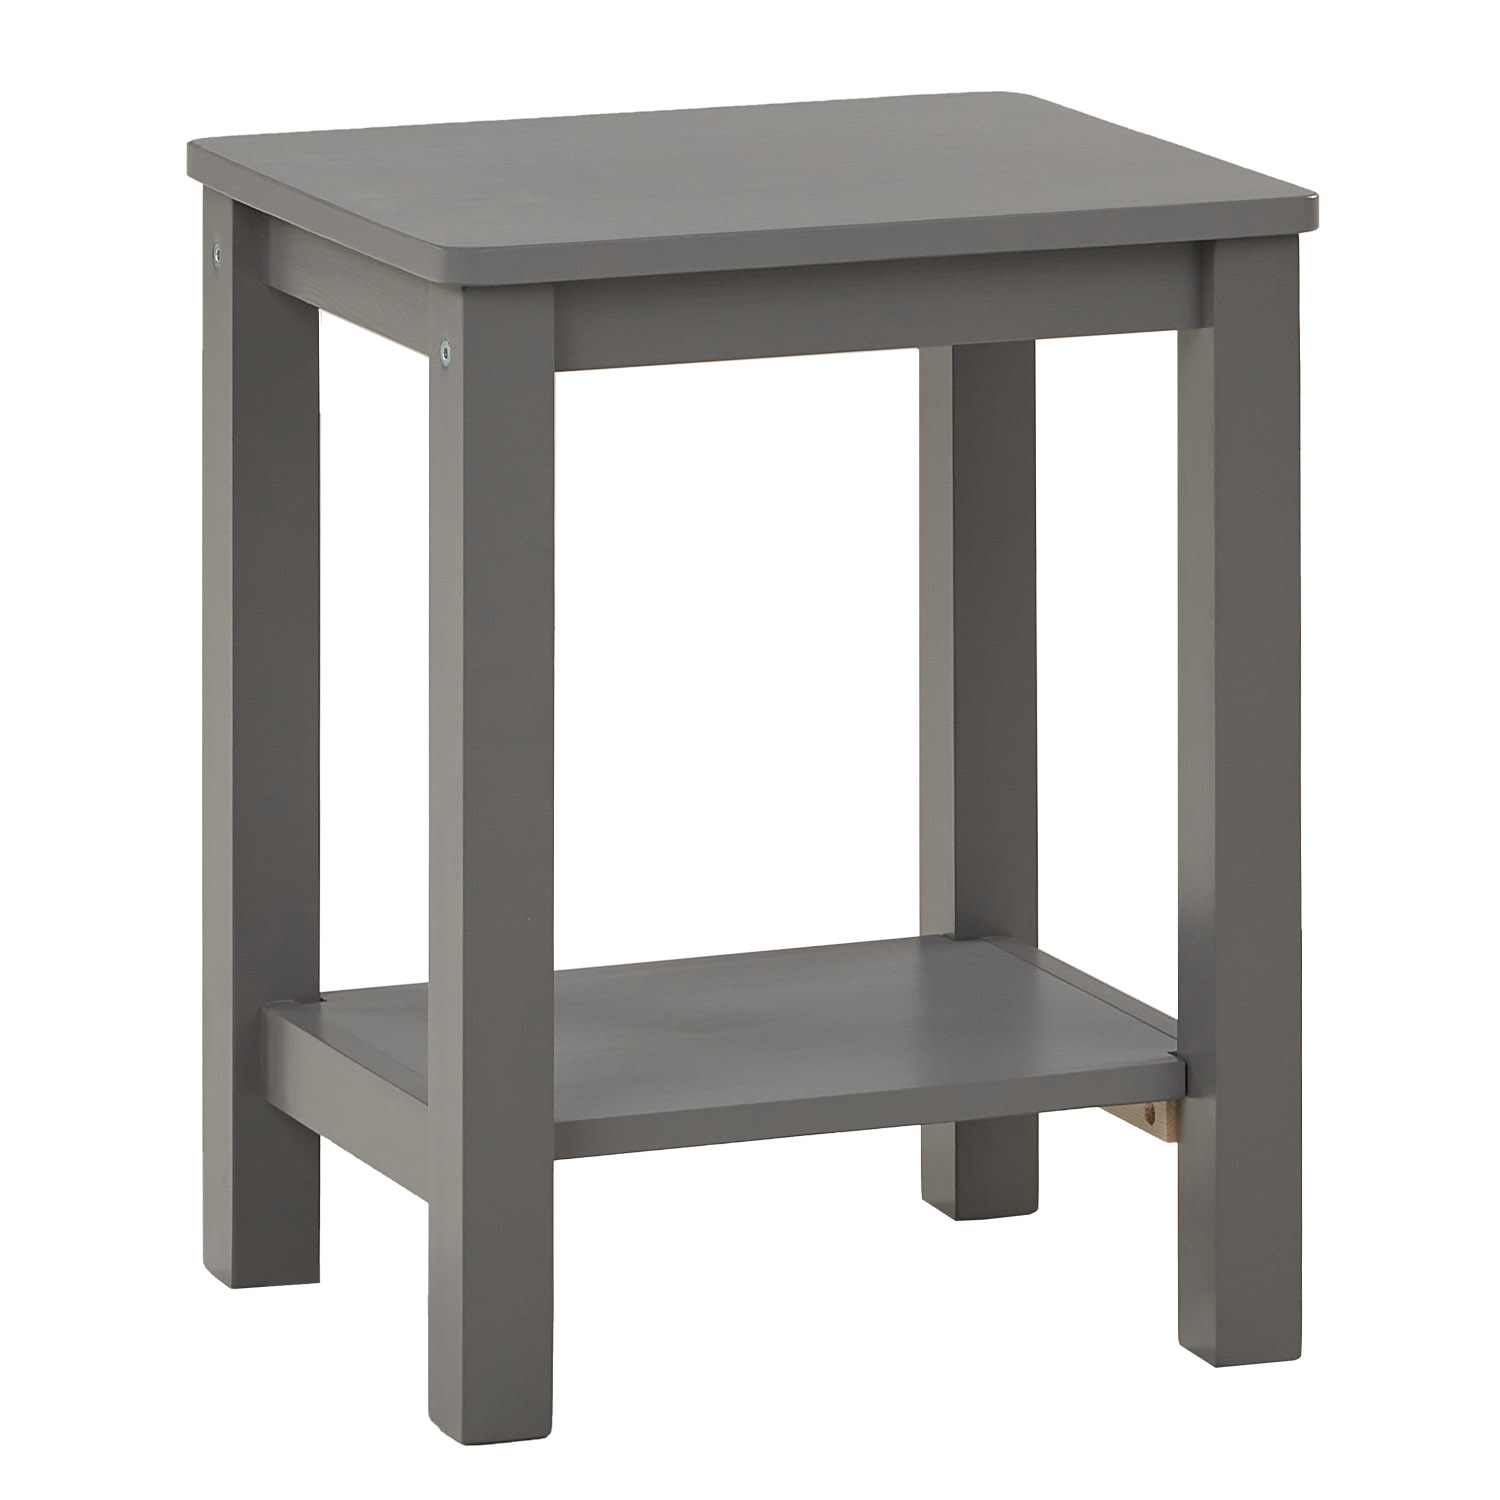 Side Table Grey White Natural Nightstand Wood Bedroom Coffee Table Living Room Table